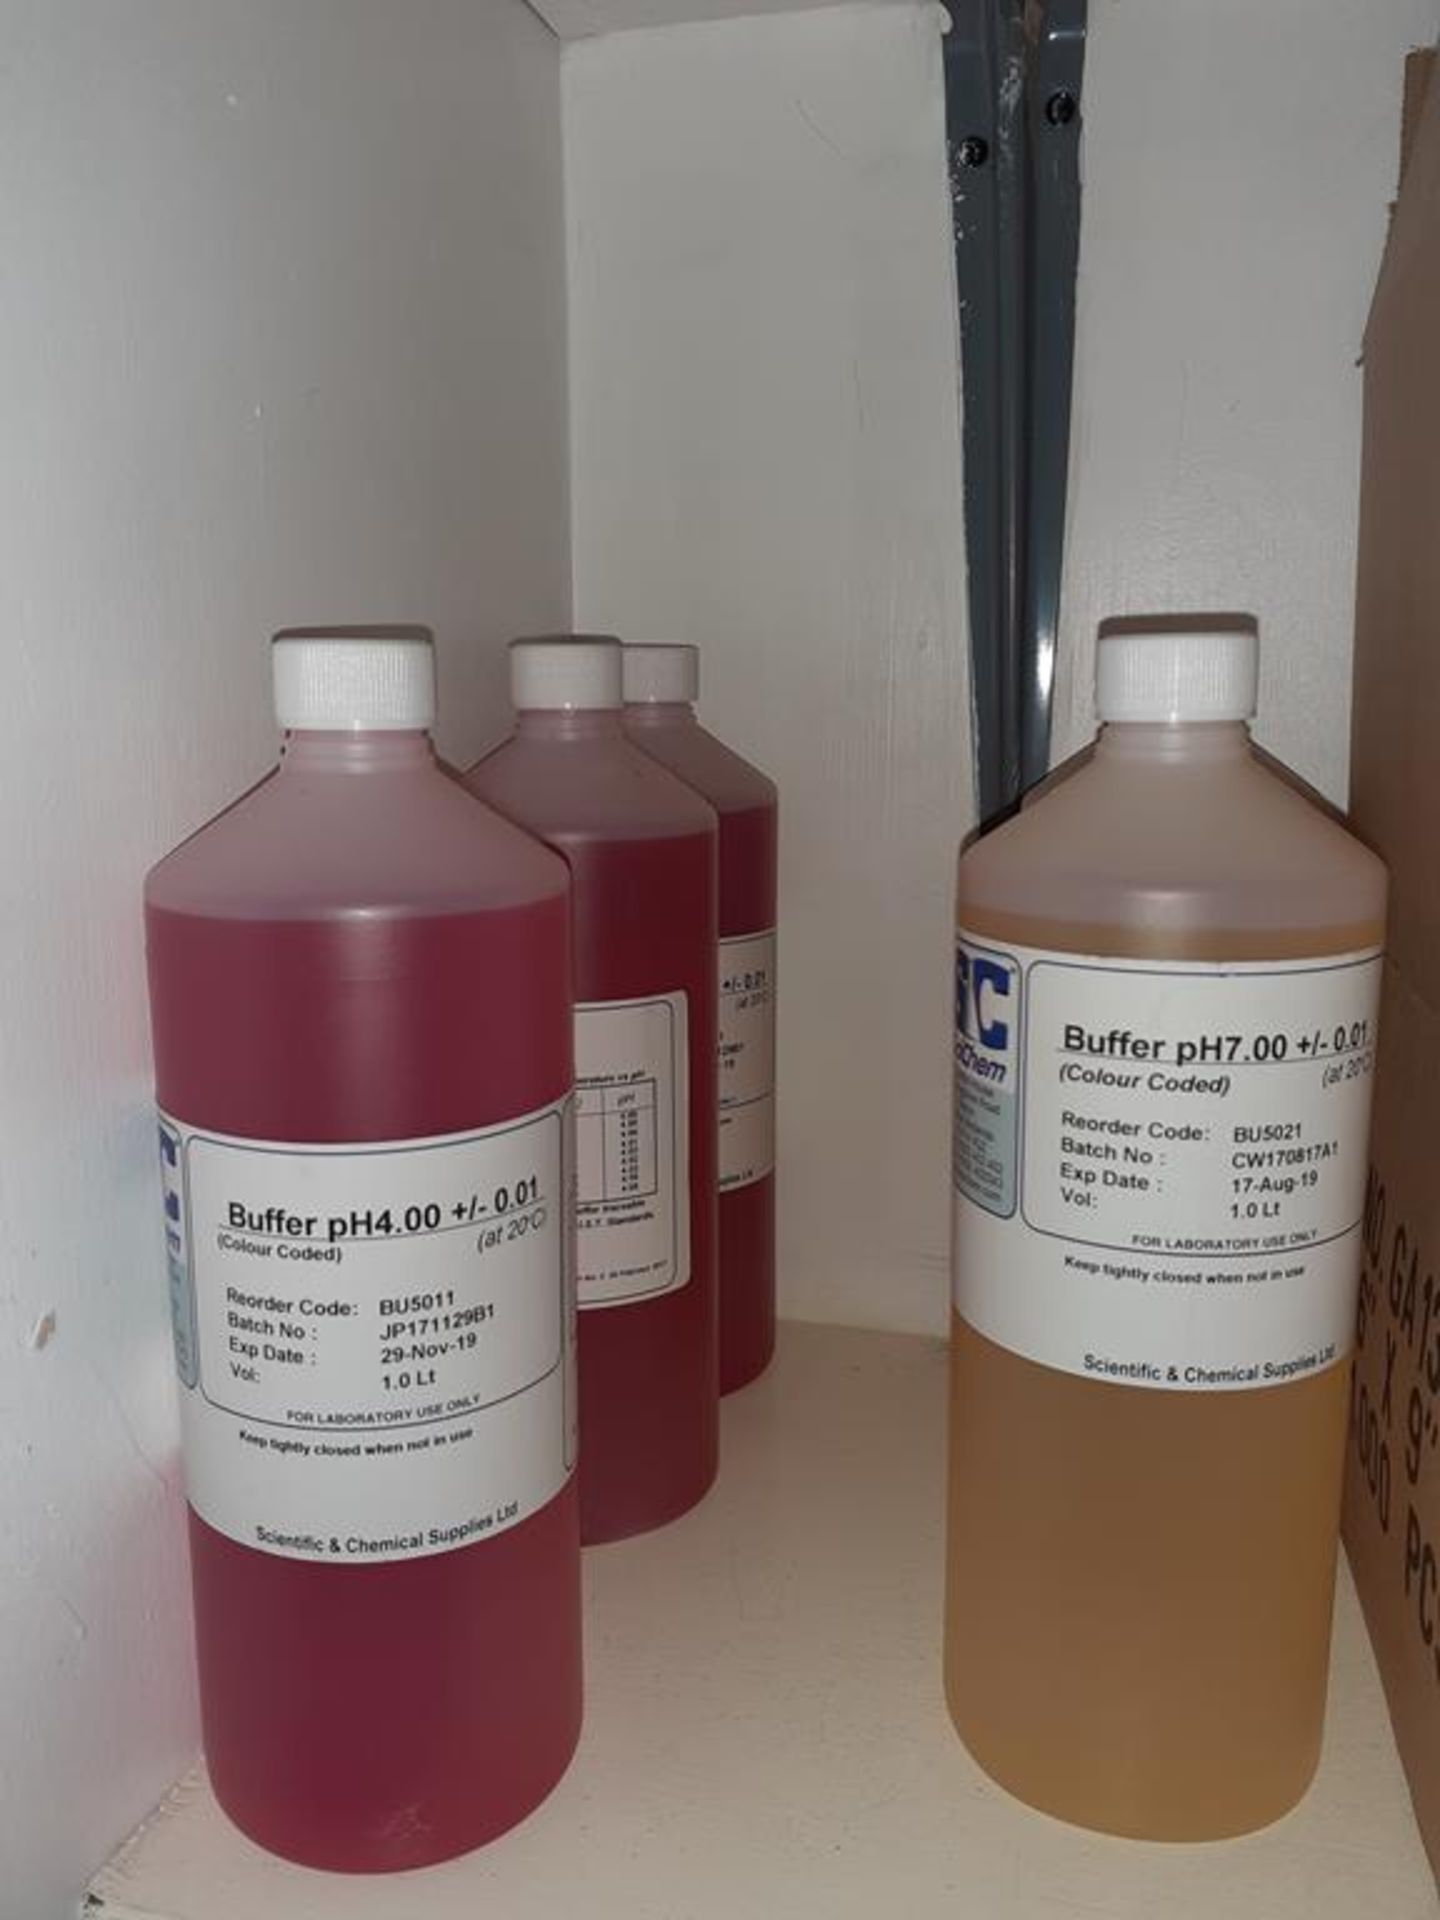 Contents of Chemical storage cupboard including 1 - Image 15 of 15